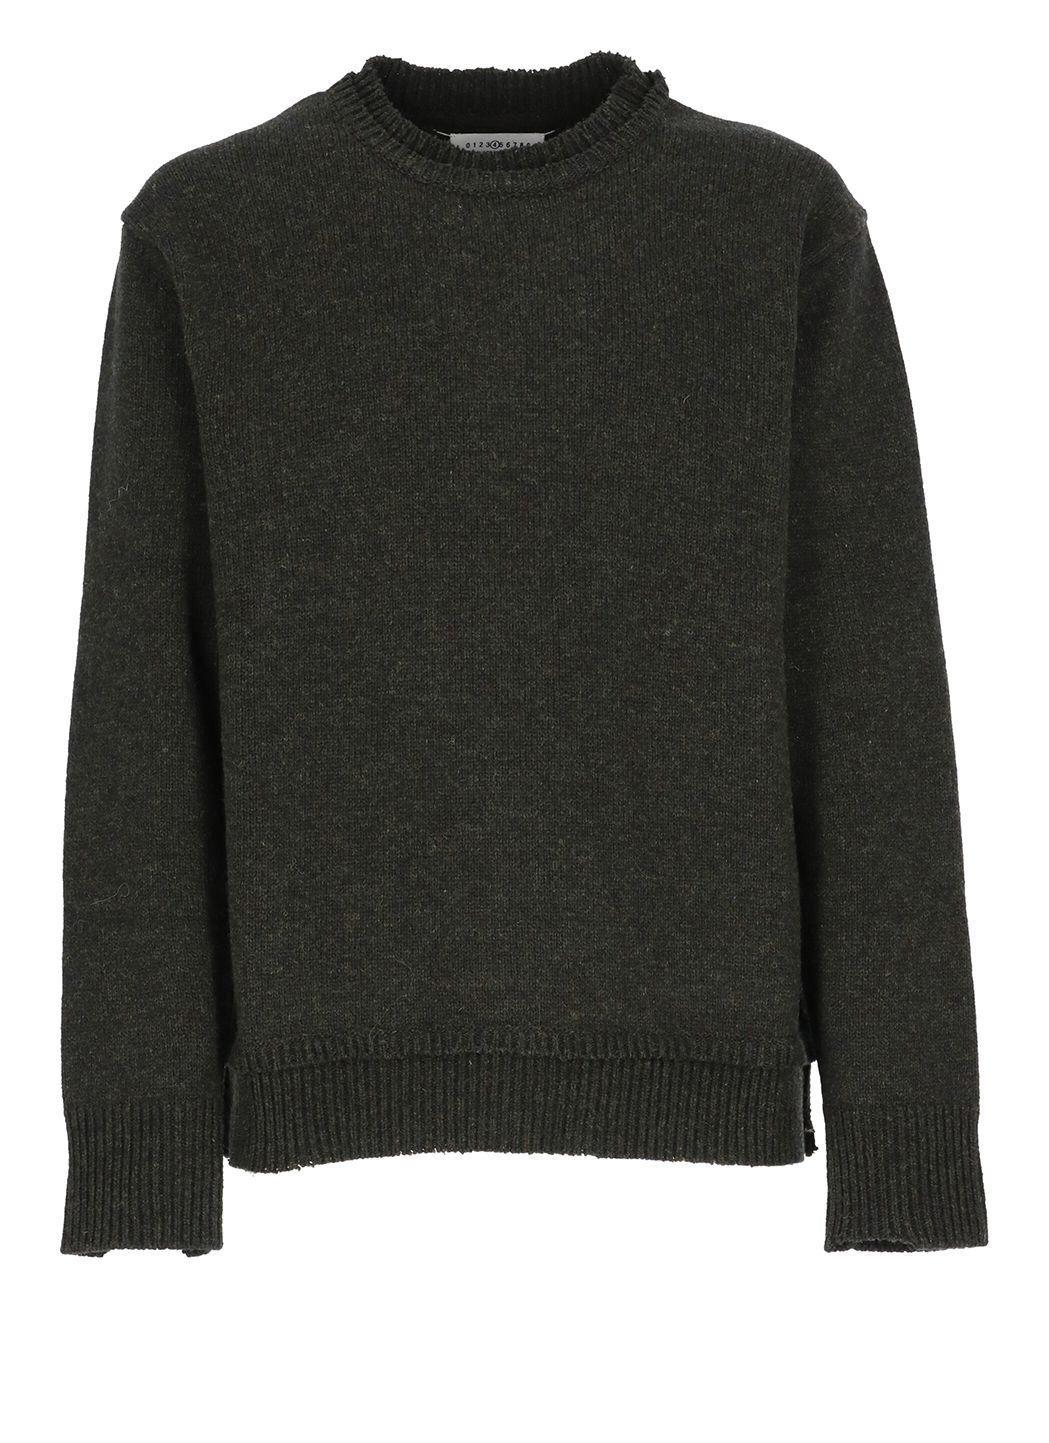 Wool, linen and cotton sweater